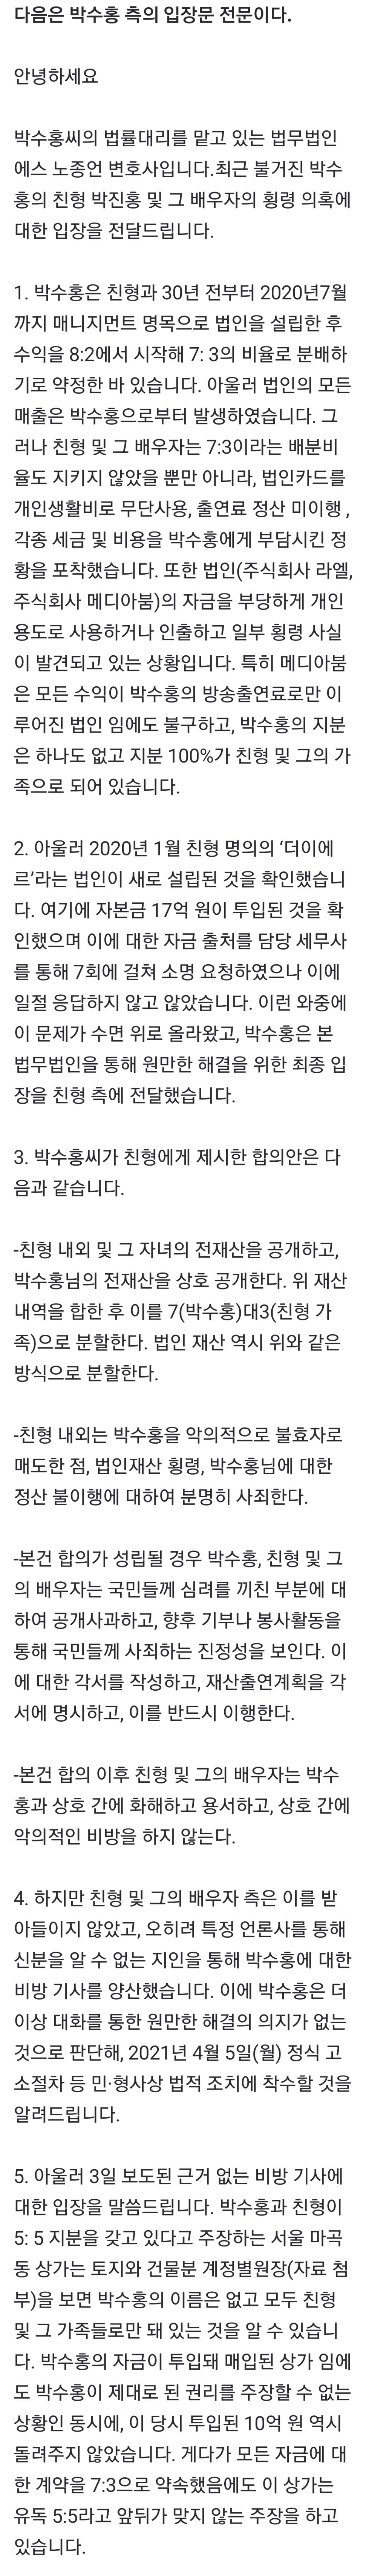 Lawyer Park Soo-hong: "We will take legal action."